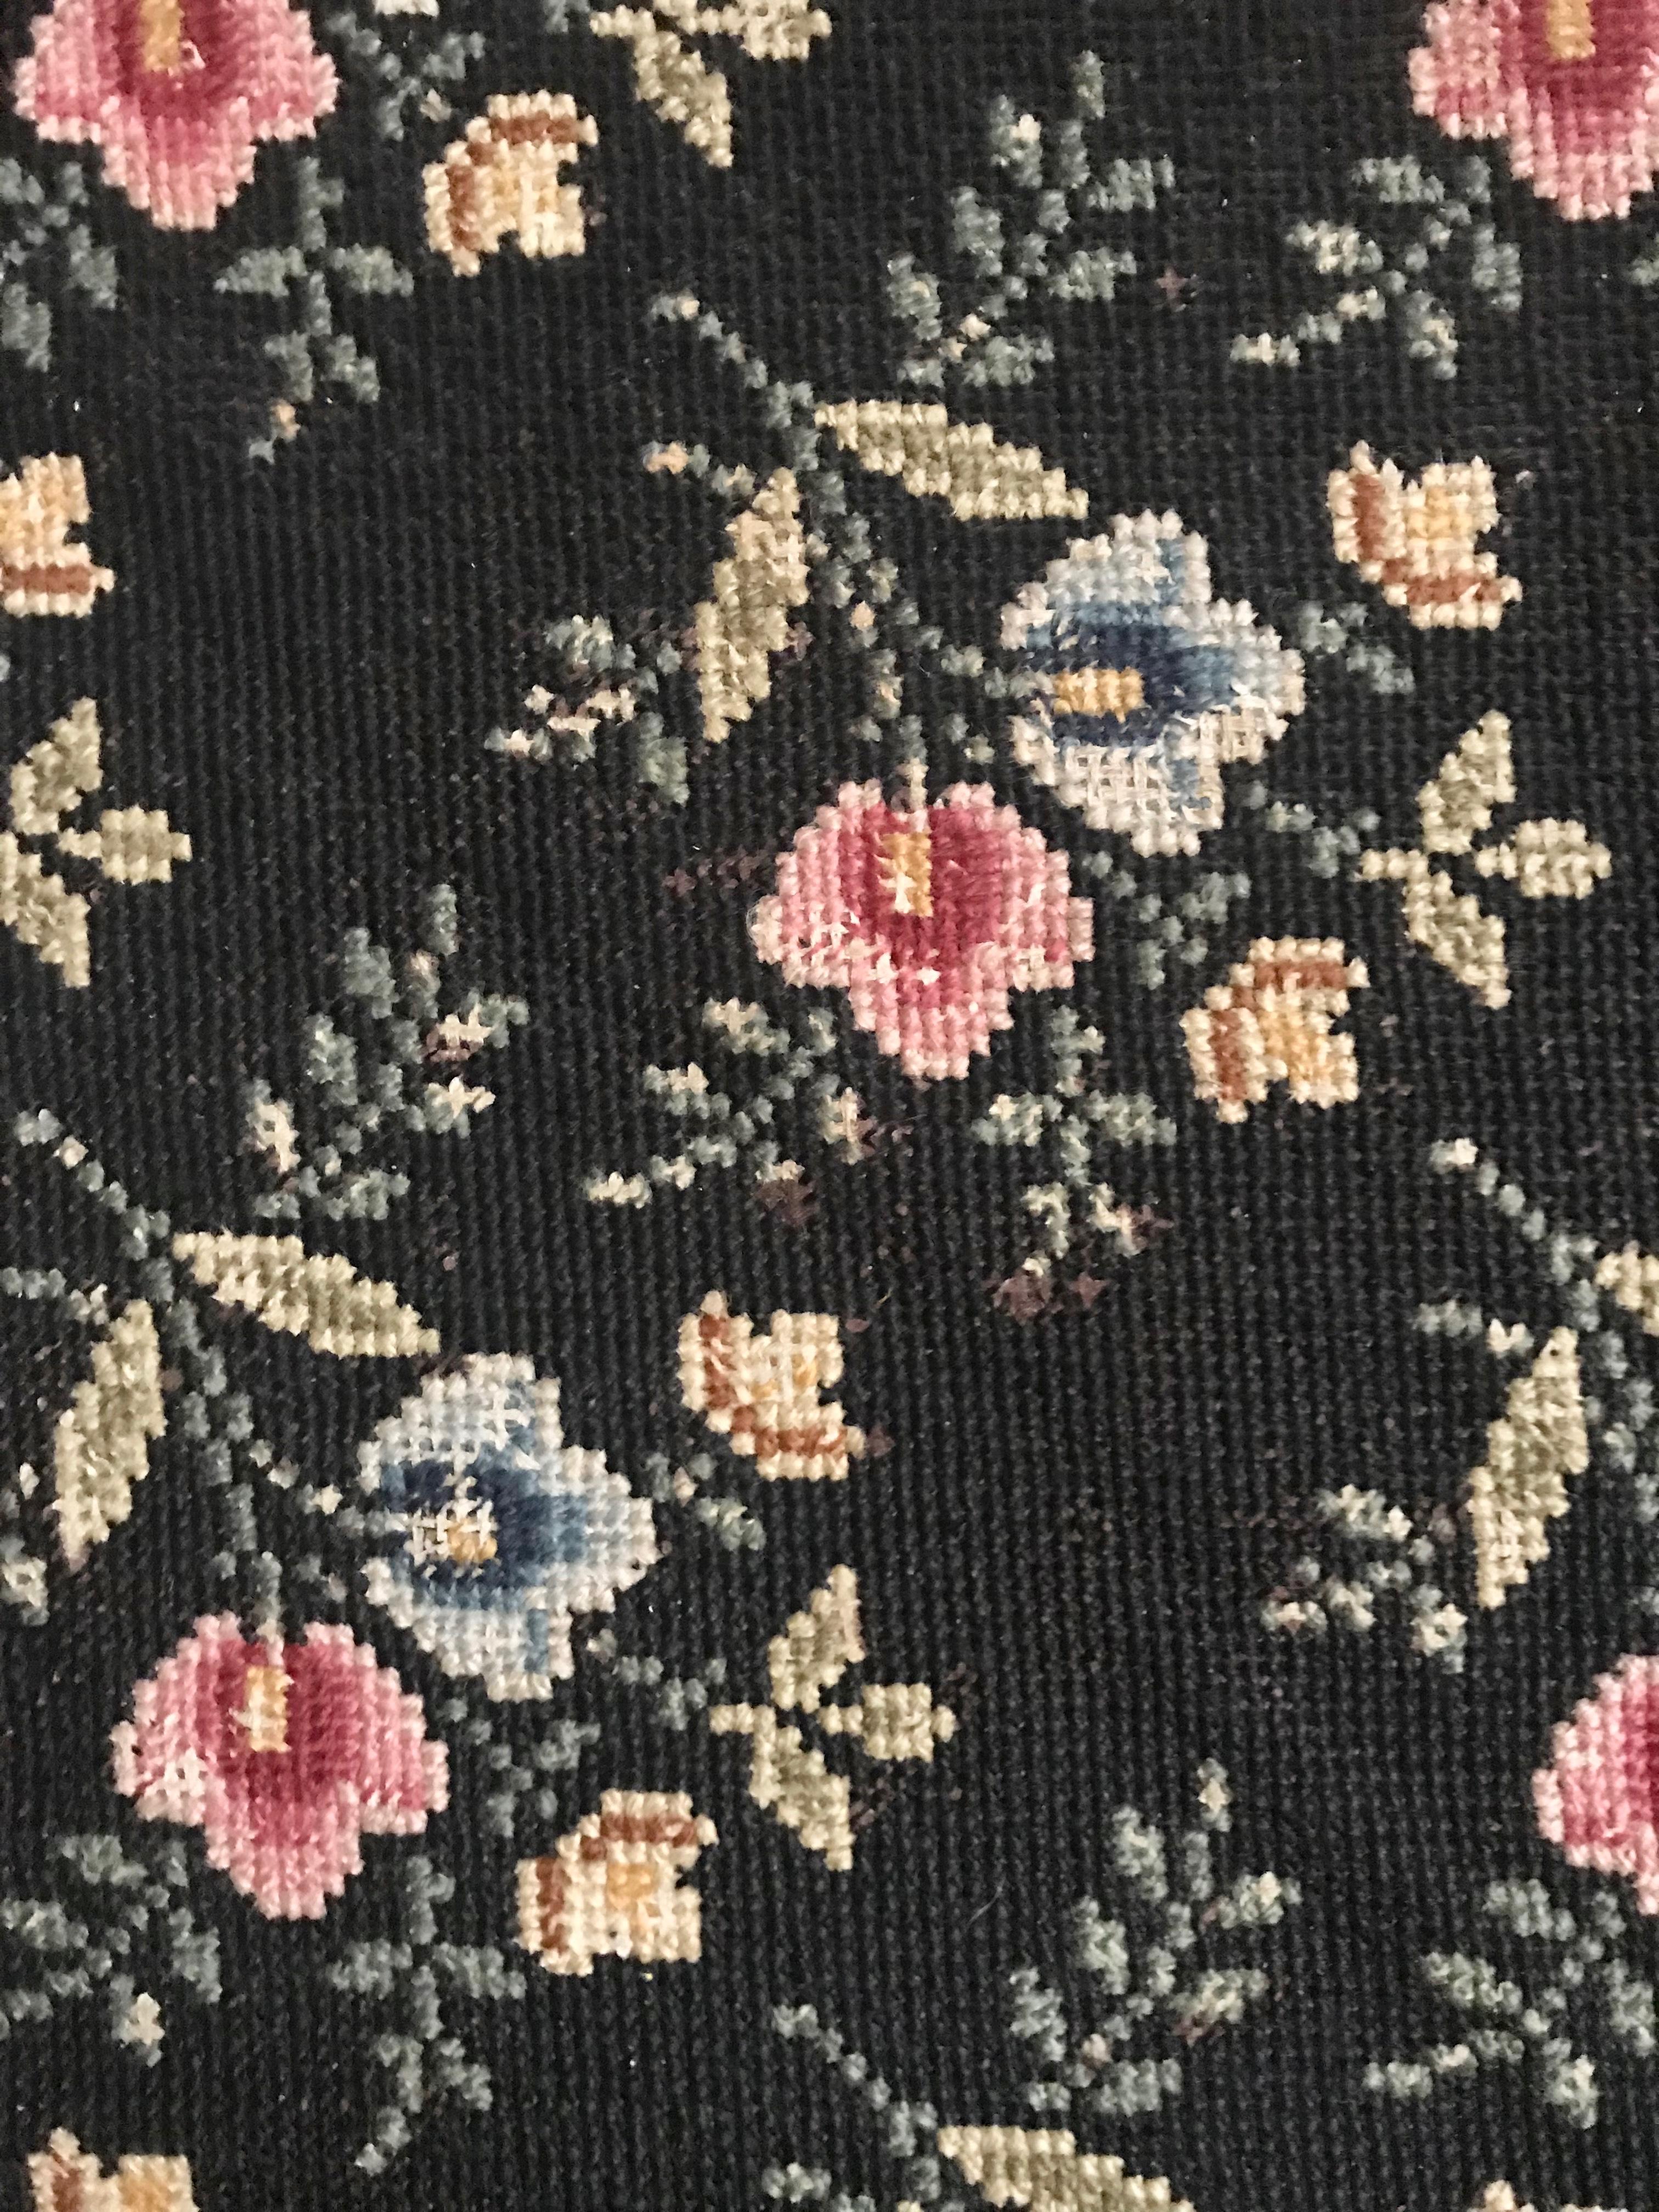 Huge Antique Black French Cross Stitch Wool Carpet Madeleine Castaing For Sale 4